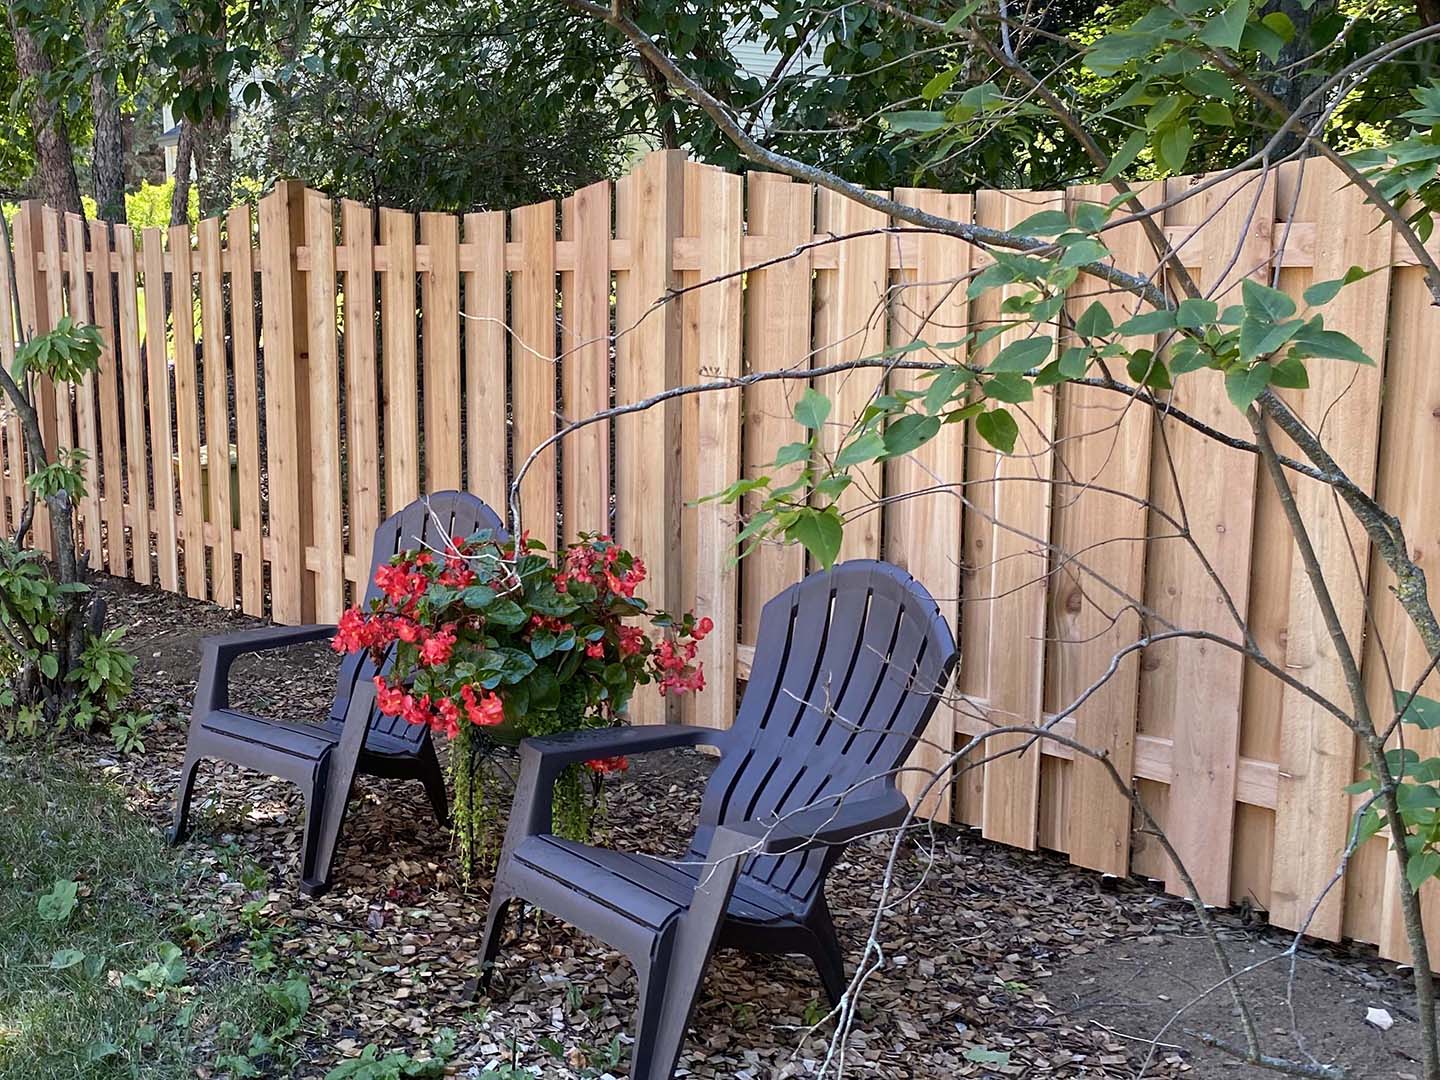 Wyoming Minnesota residential and commercial fencing